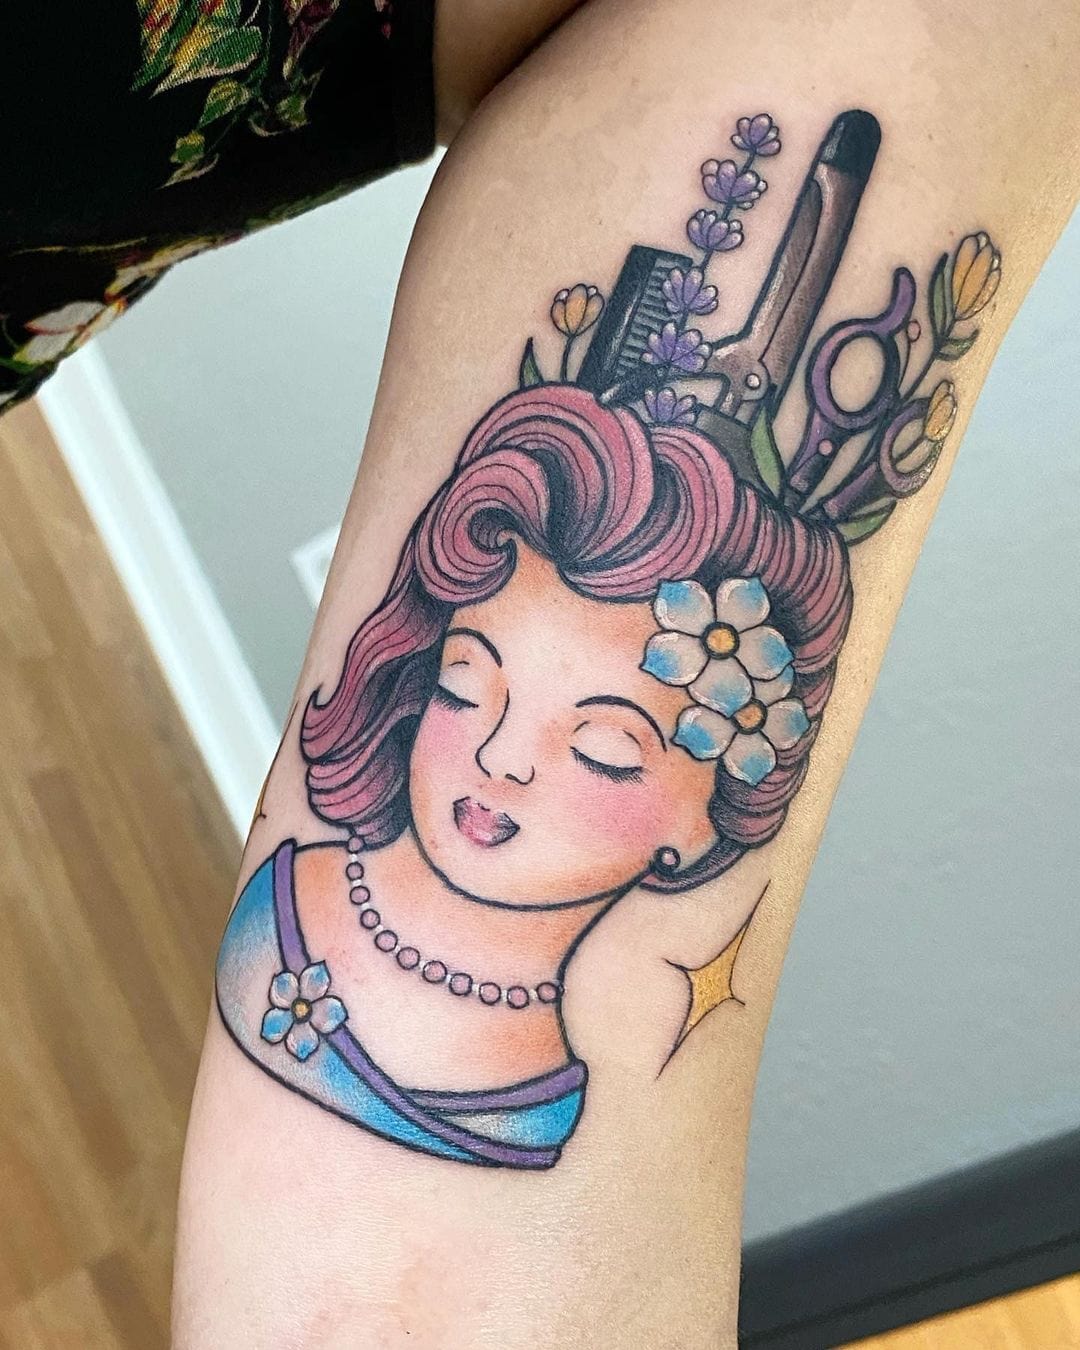 From Clippers to Ink: A Gallery of Hairstylist Tattoos You’ll Love